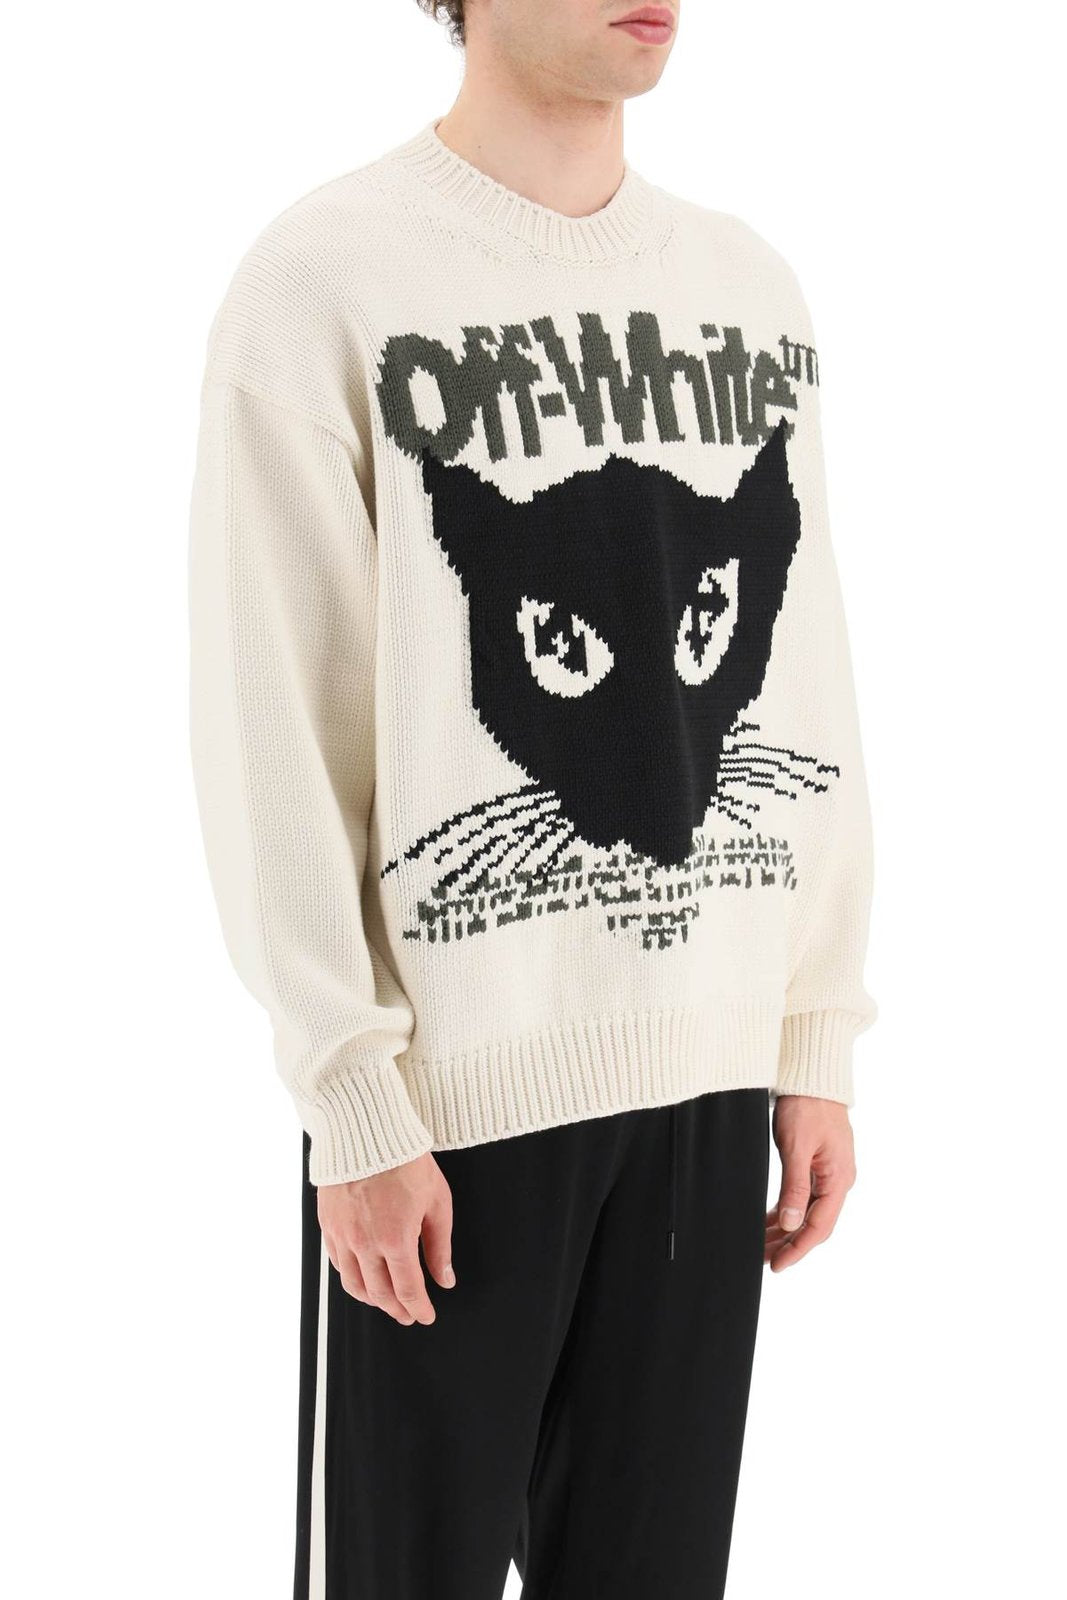 Off-White Intarsia-Knit Crewneck Long-Sleeved Jumper